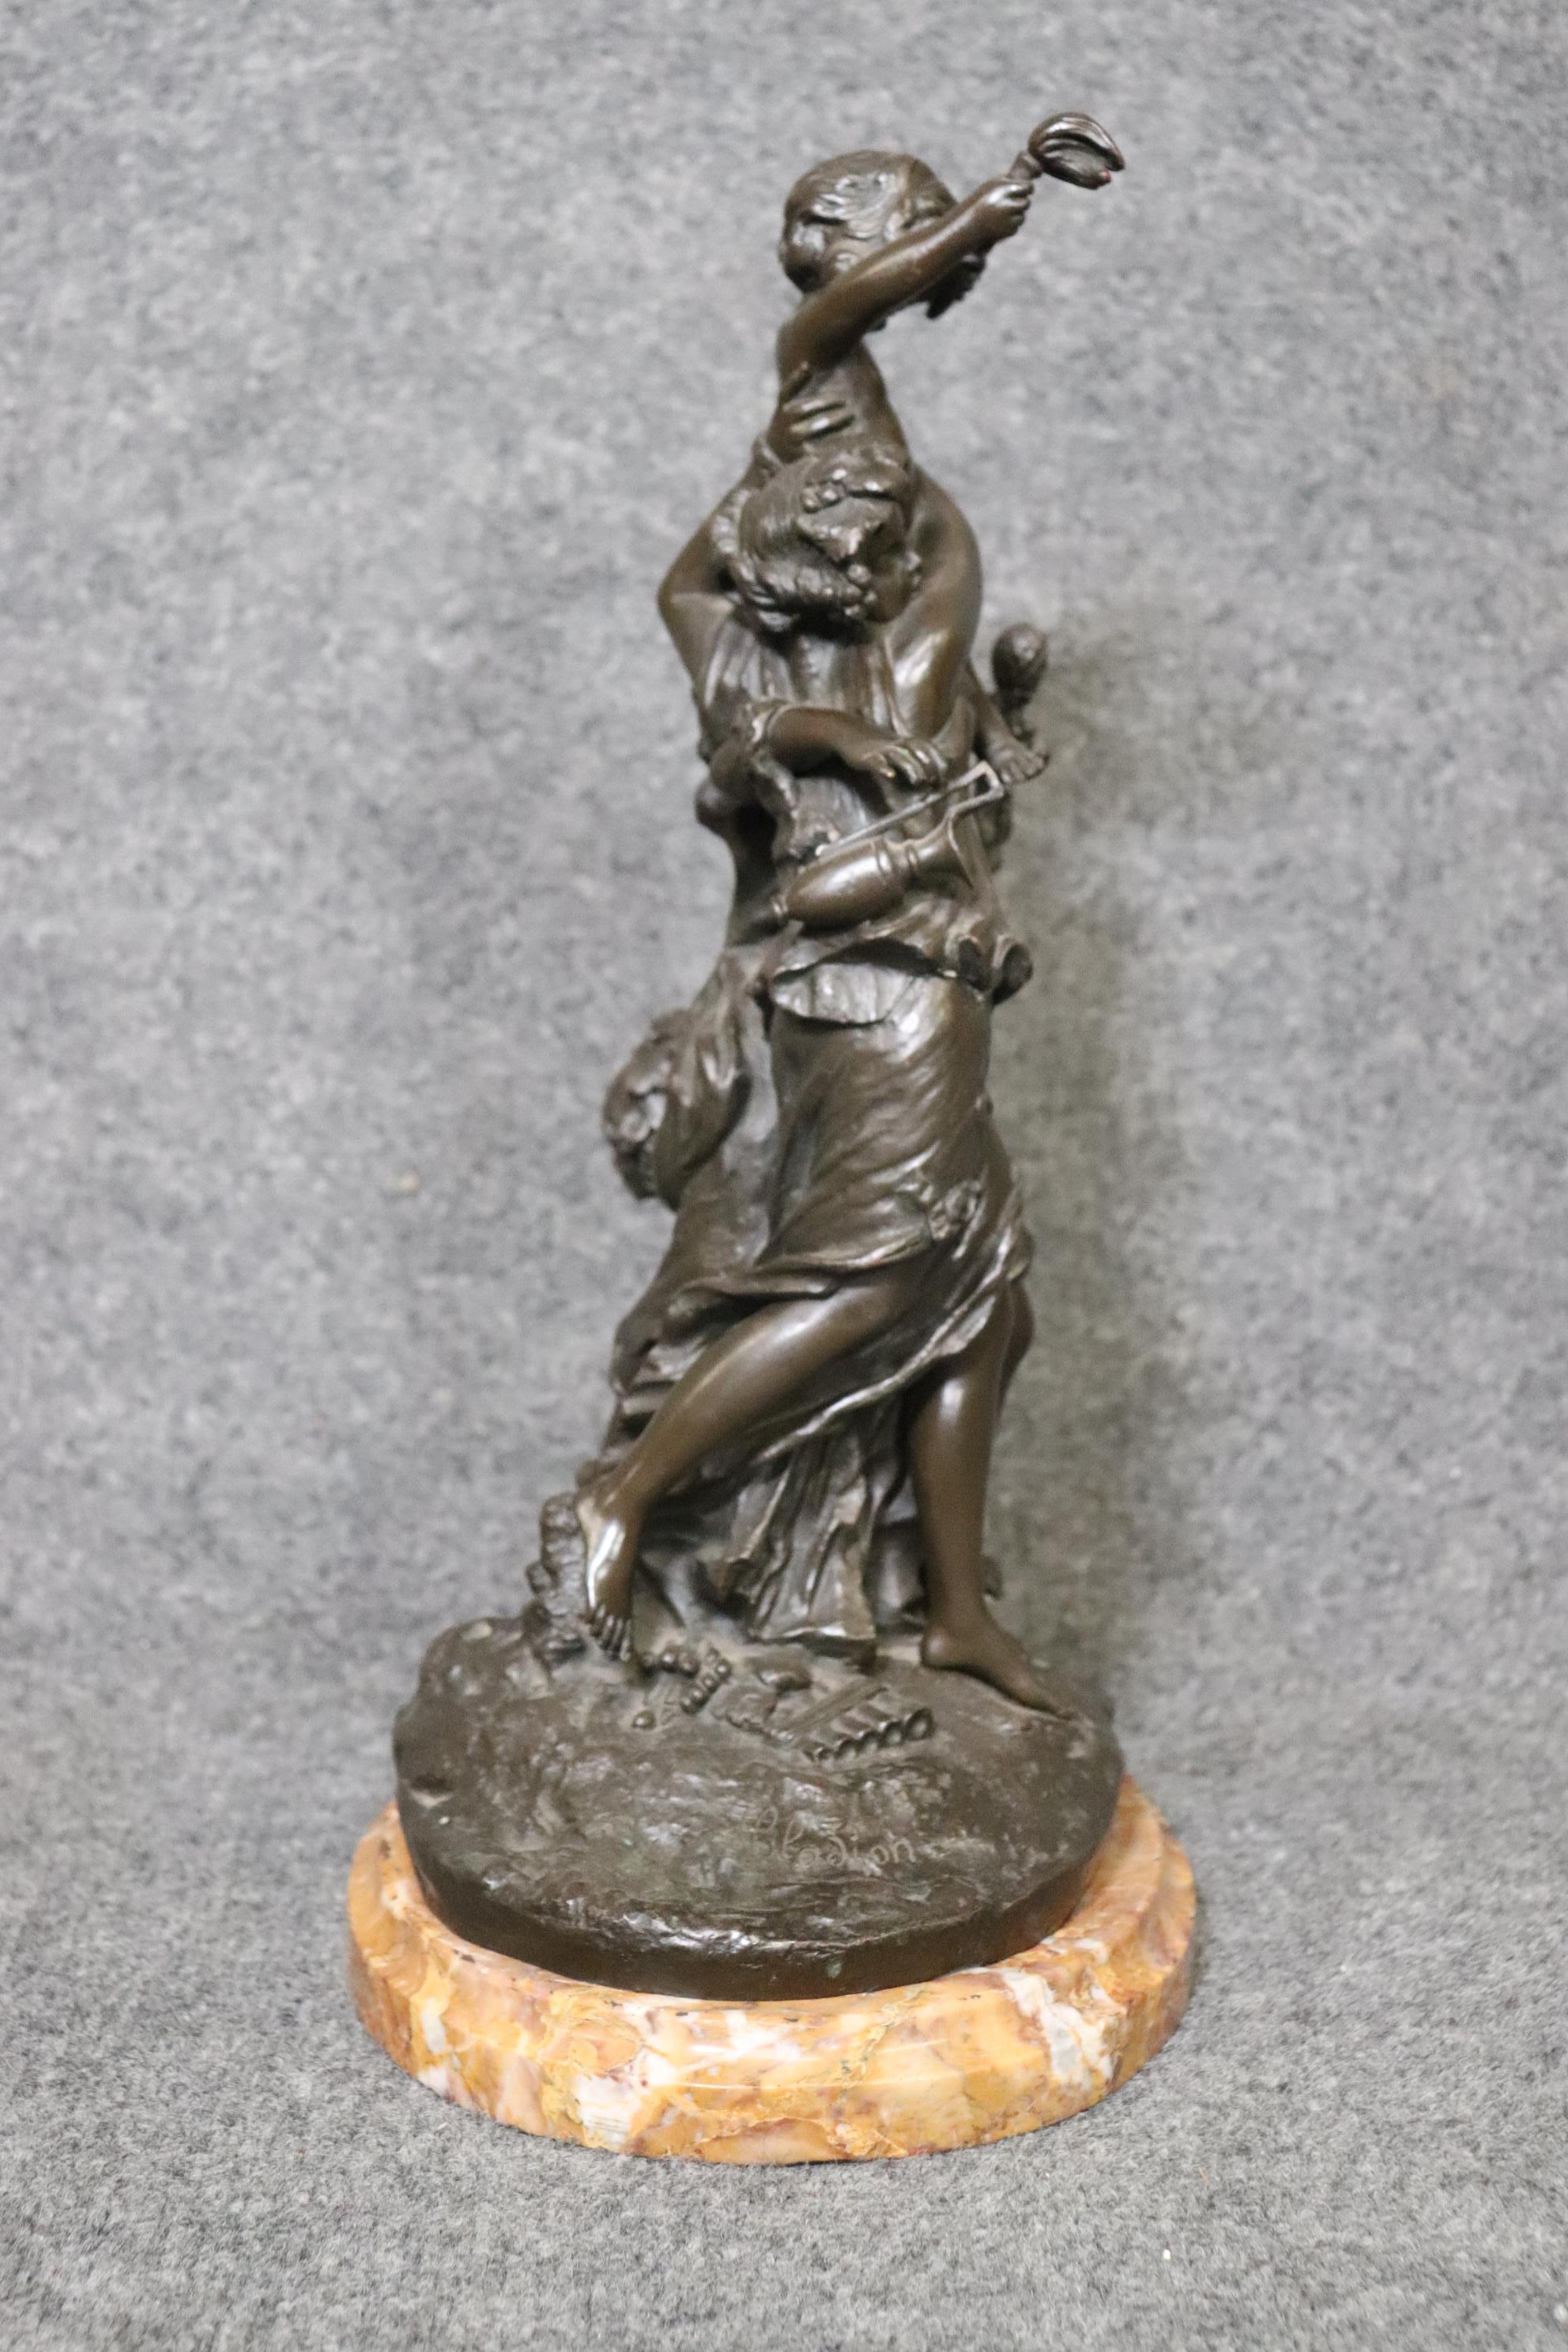 Dimensions- H: 17 3/4in W: 11 1/4in D: 8.5in
This Bronze Signed After Claude Michael Clodion titled 